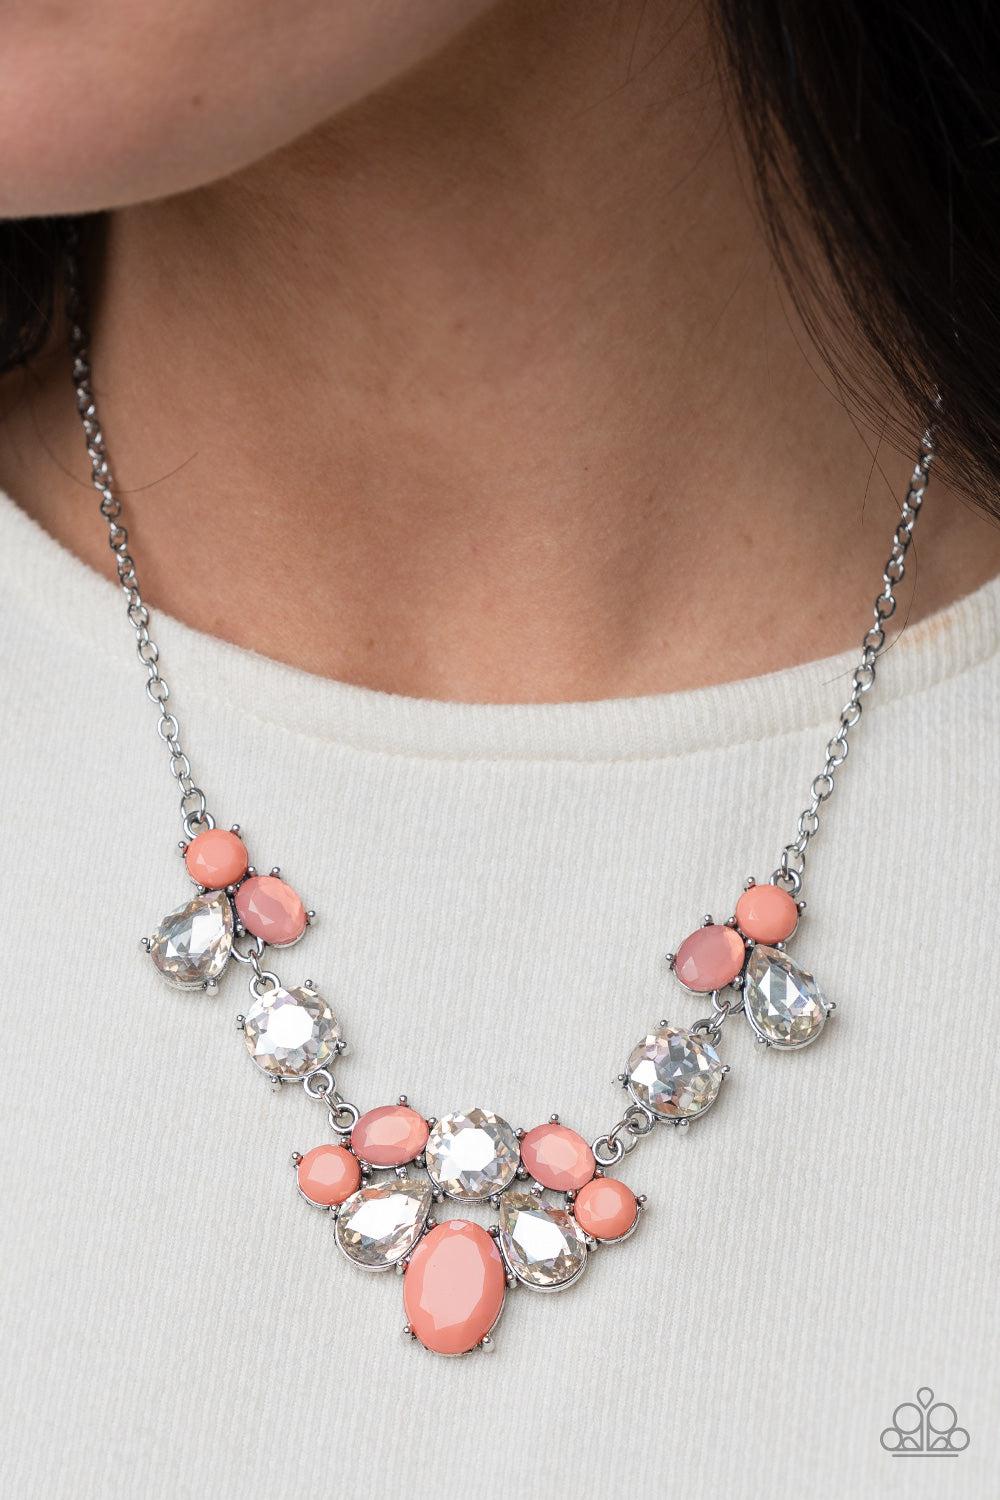 Ethereal Romance Coral and White Rhinestone Necklace - Paparazzi Accessories